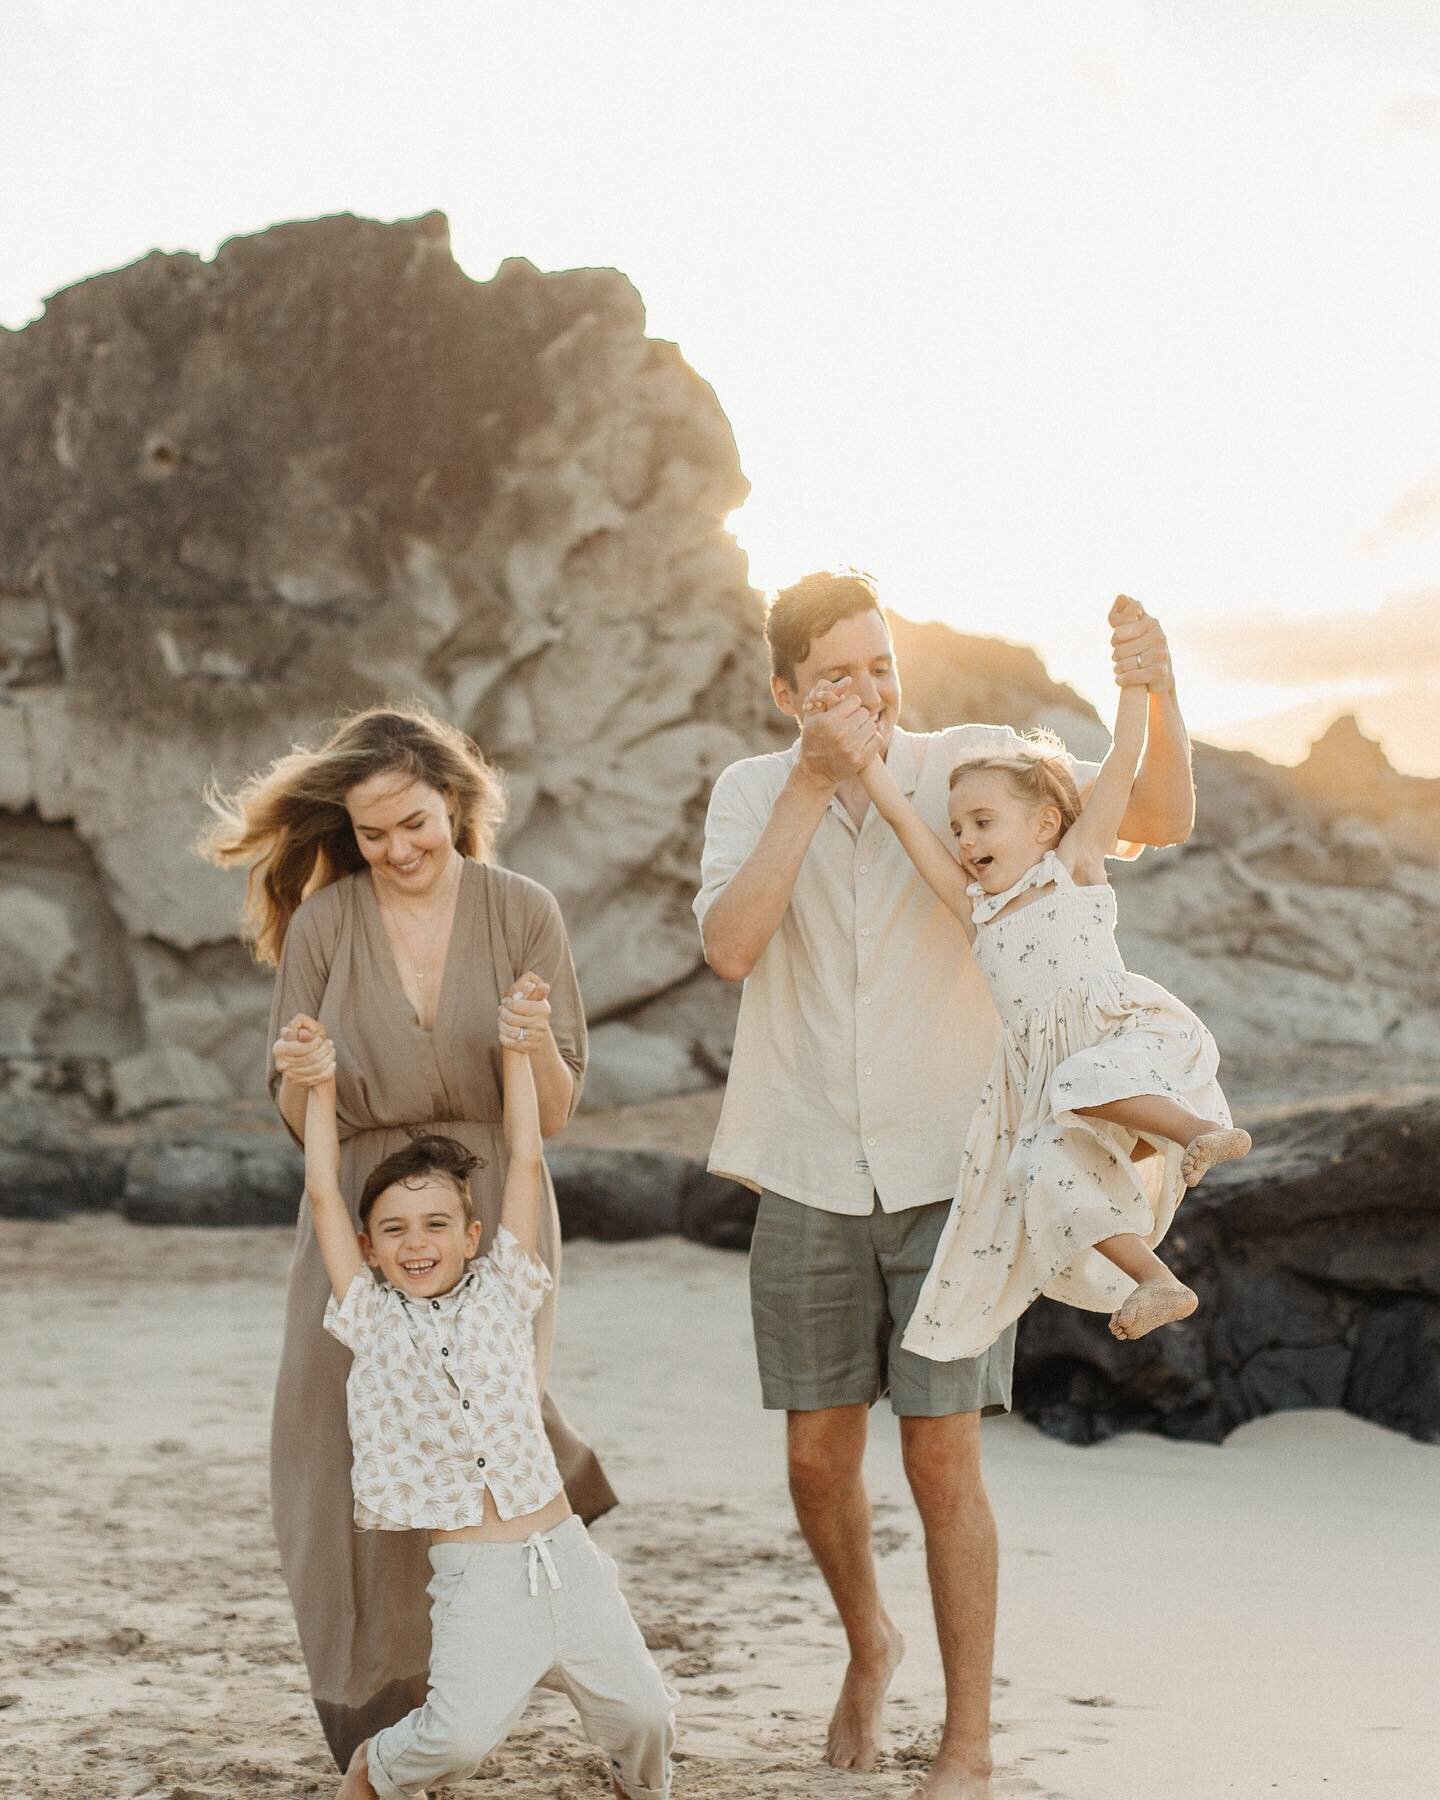 Capturing sunsets &amp; adorable families&gt;&gt;